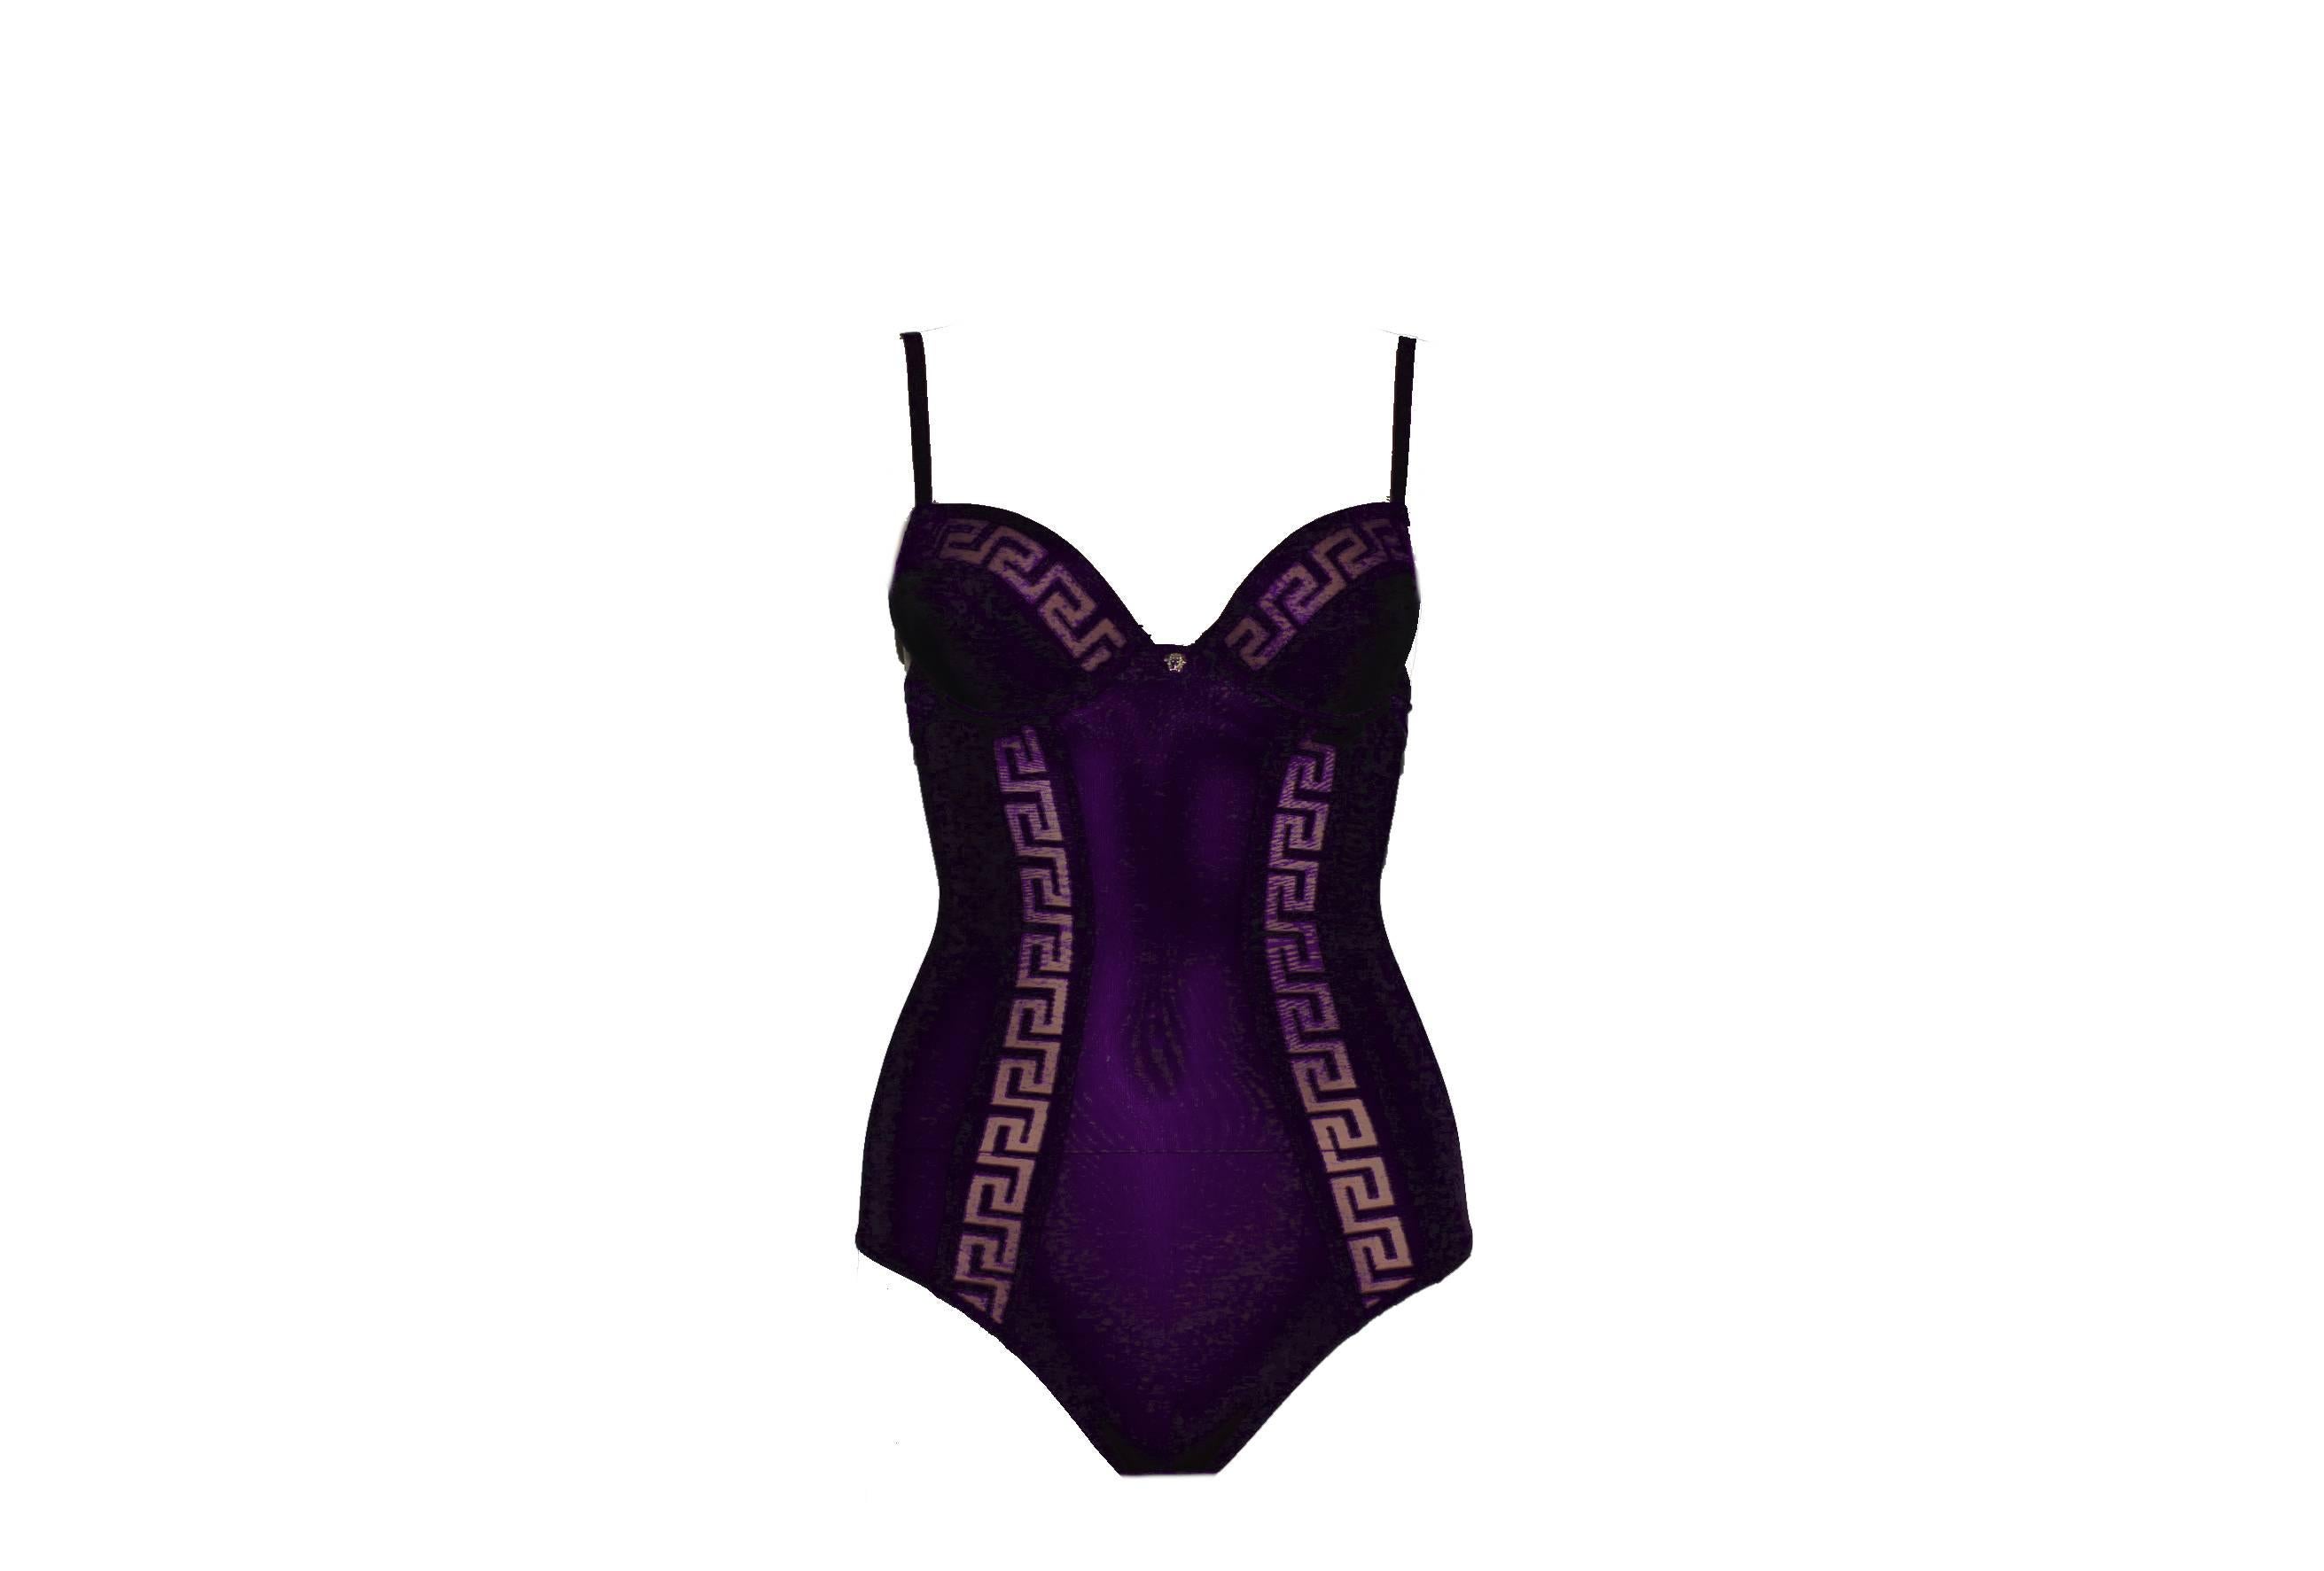 Beautiful purple corset suit by VERSACE
Perfect to wear under a sexy lace dress
Medusa head details on top
Brandnew with hygenic protection in crotch
Made in Italy
Size IT 1, fits best US 4